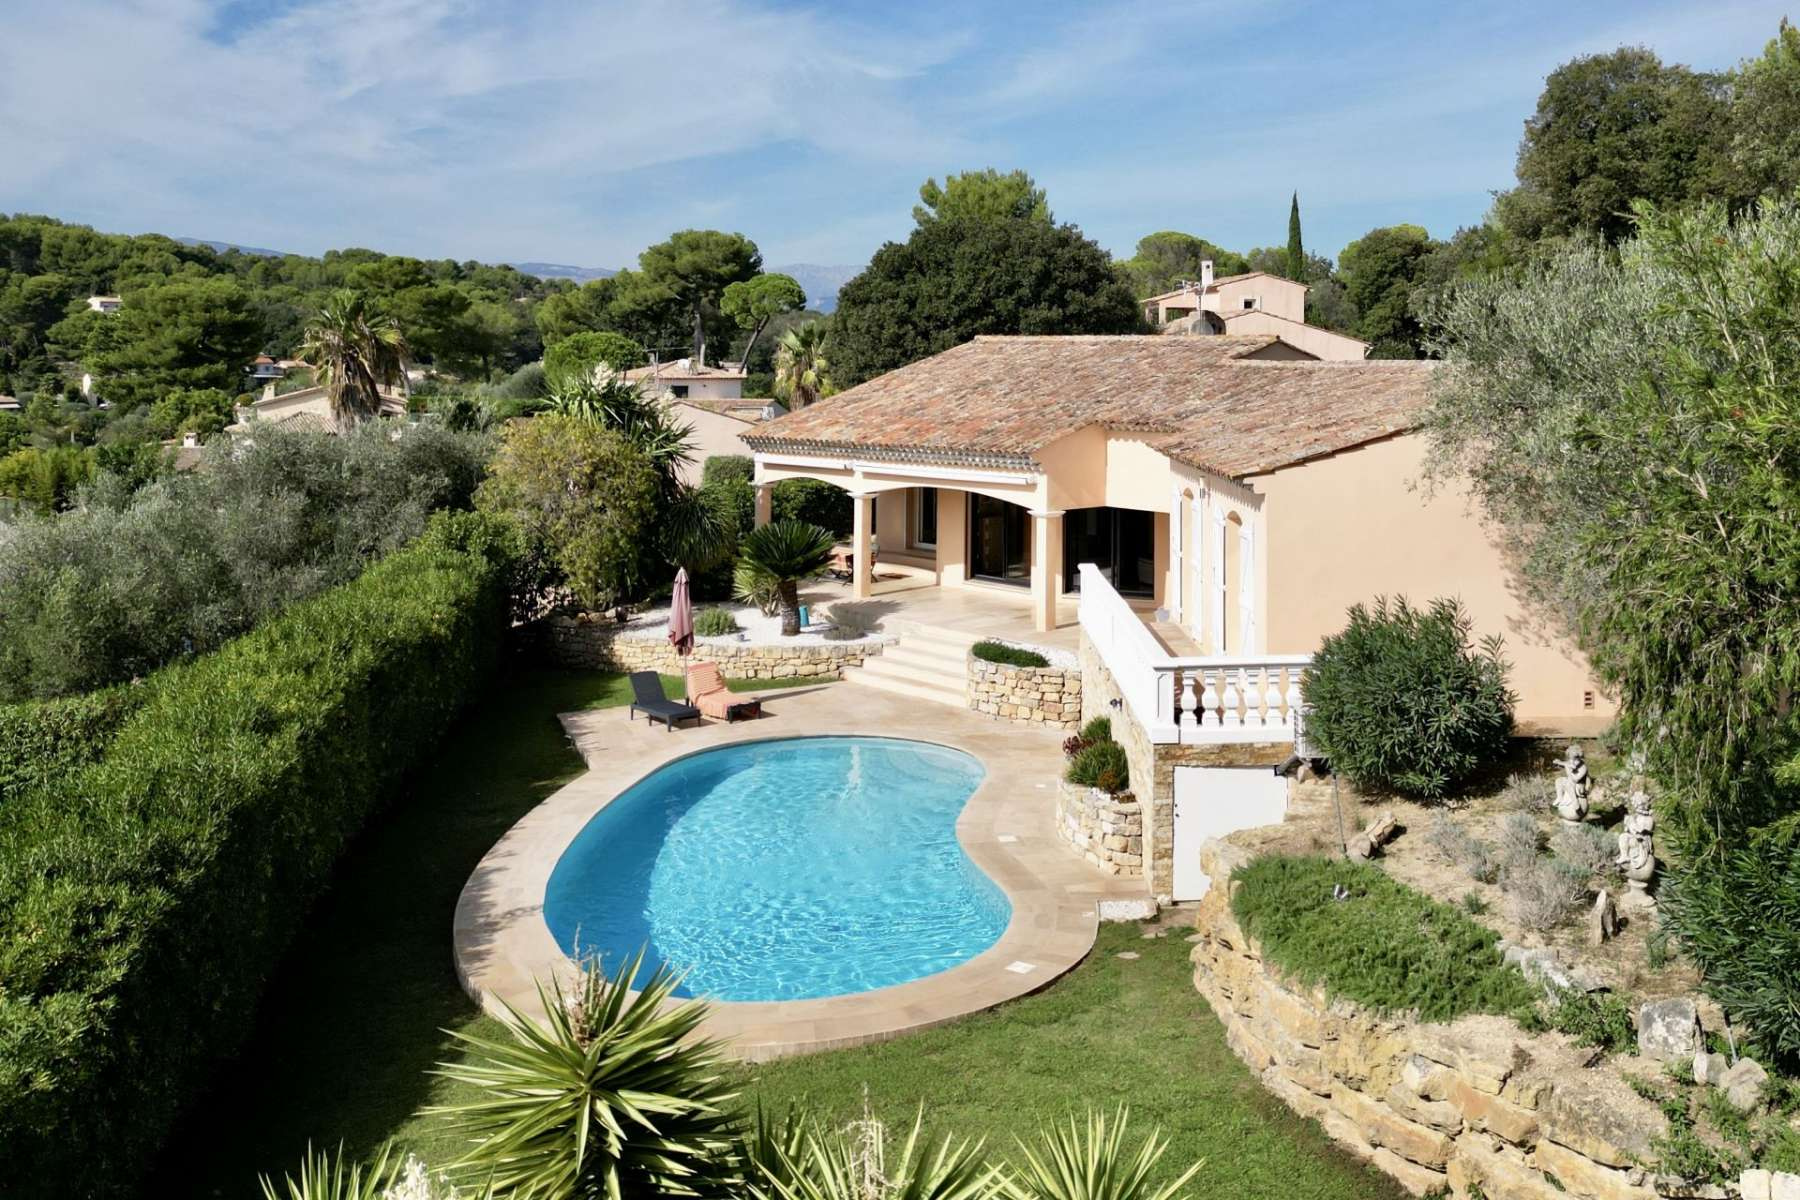 Villa in a closed domain with Super Cannes views